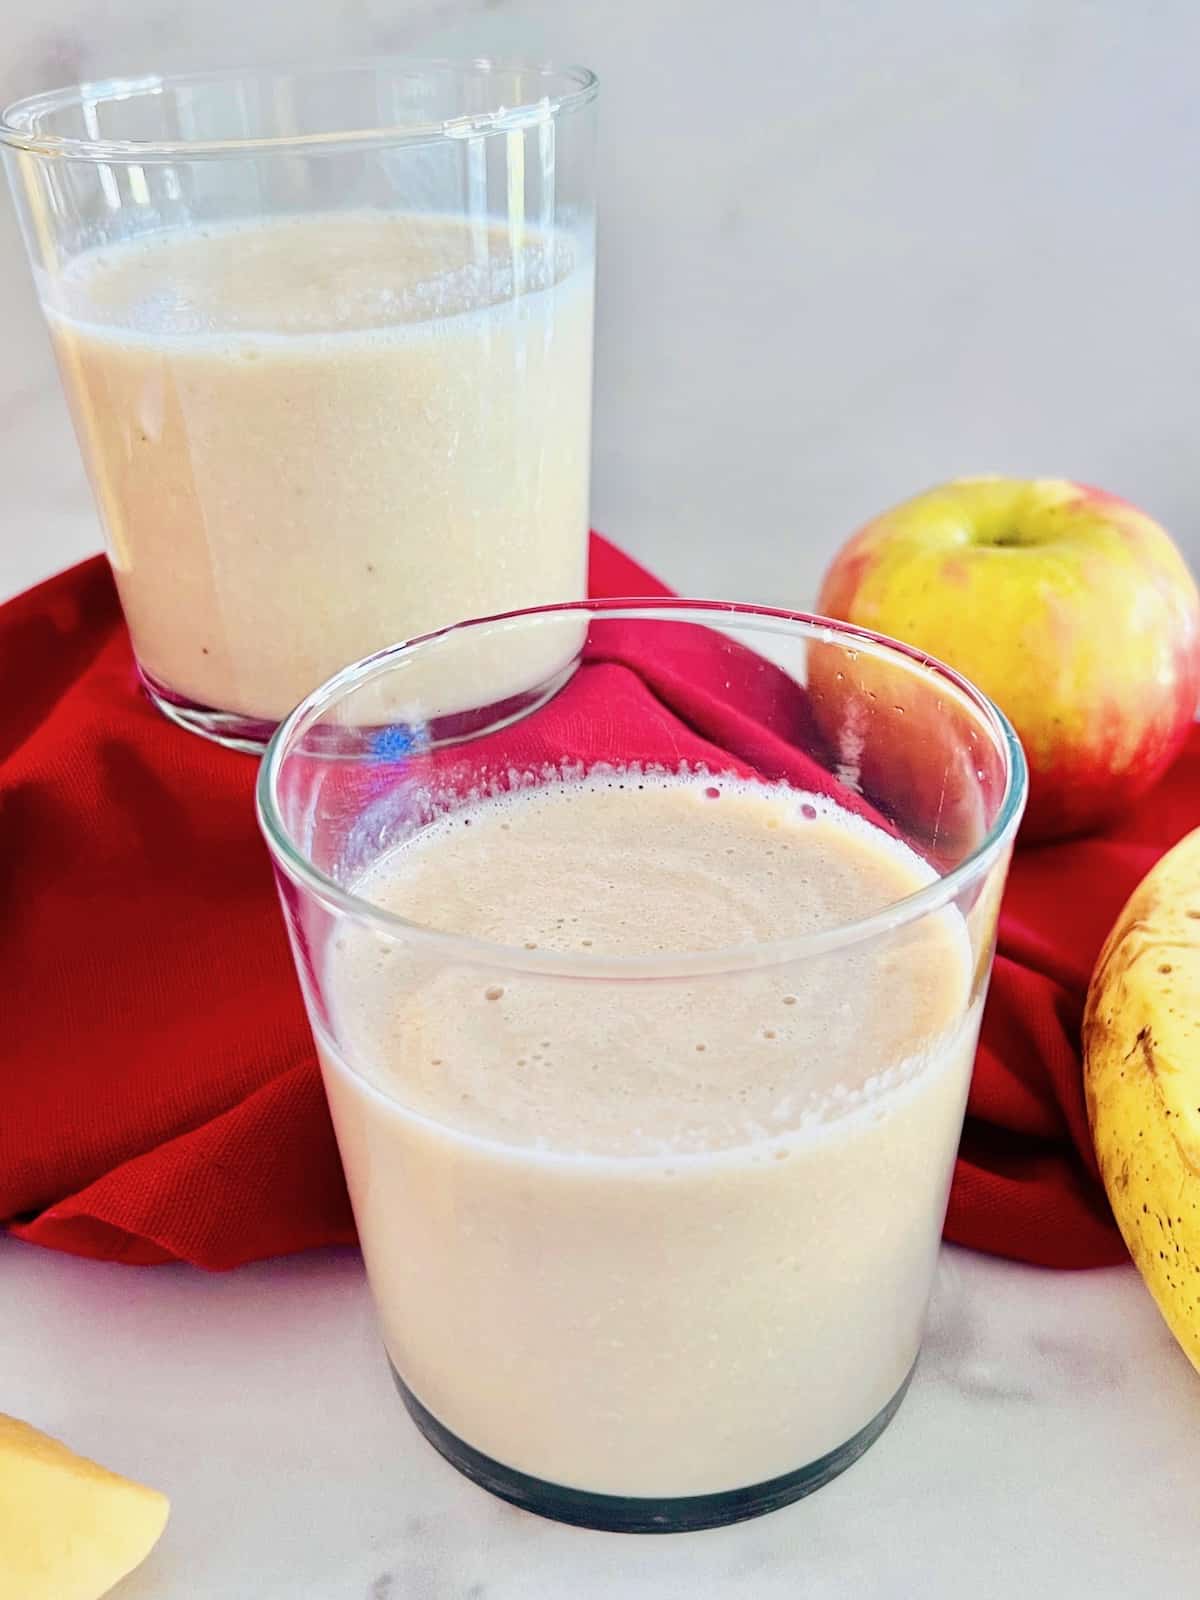 Smoothies made from apple and banana with milk poured into glasses to drink.